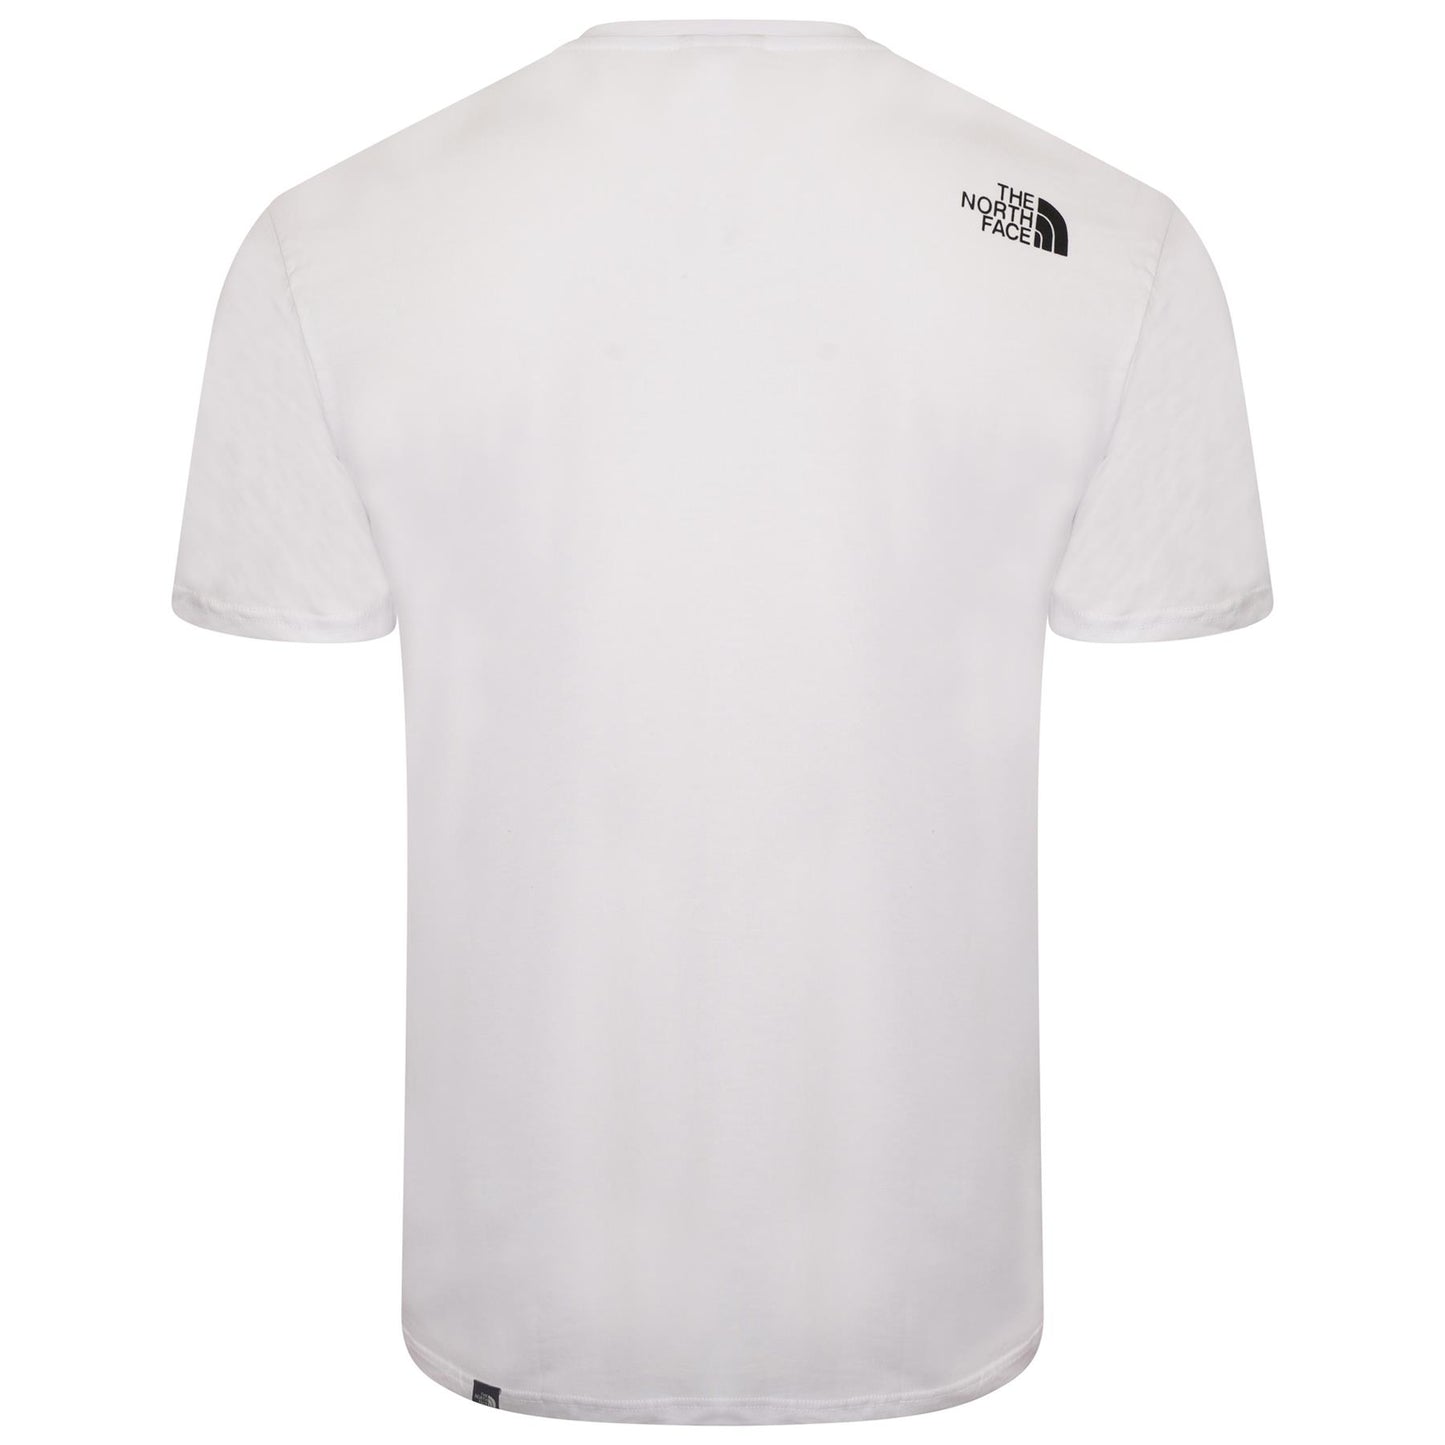 The North Face Simple Dome Cotton Logo Sports T-Shirt Top - White